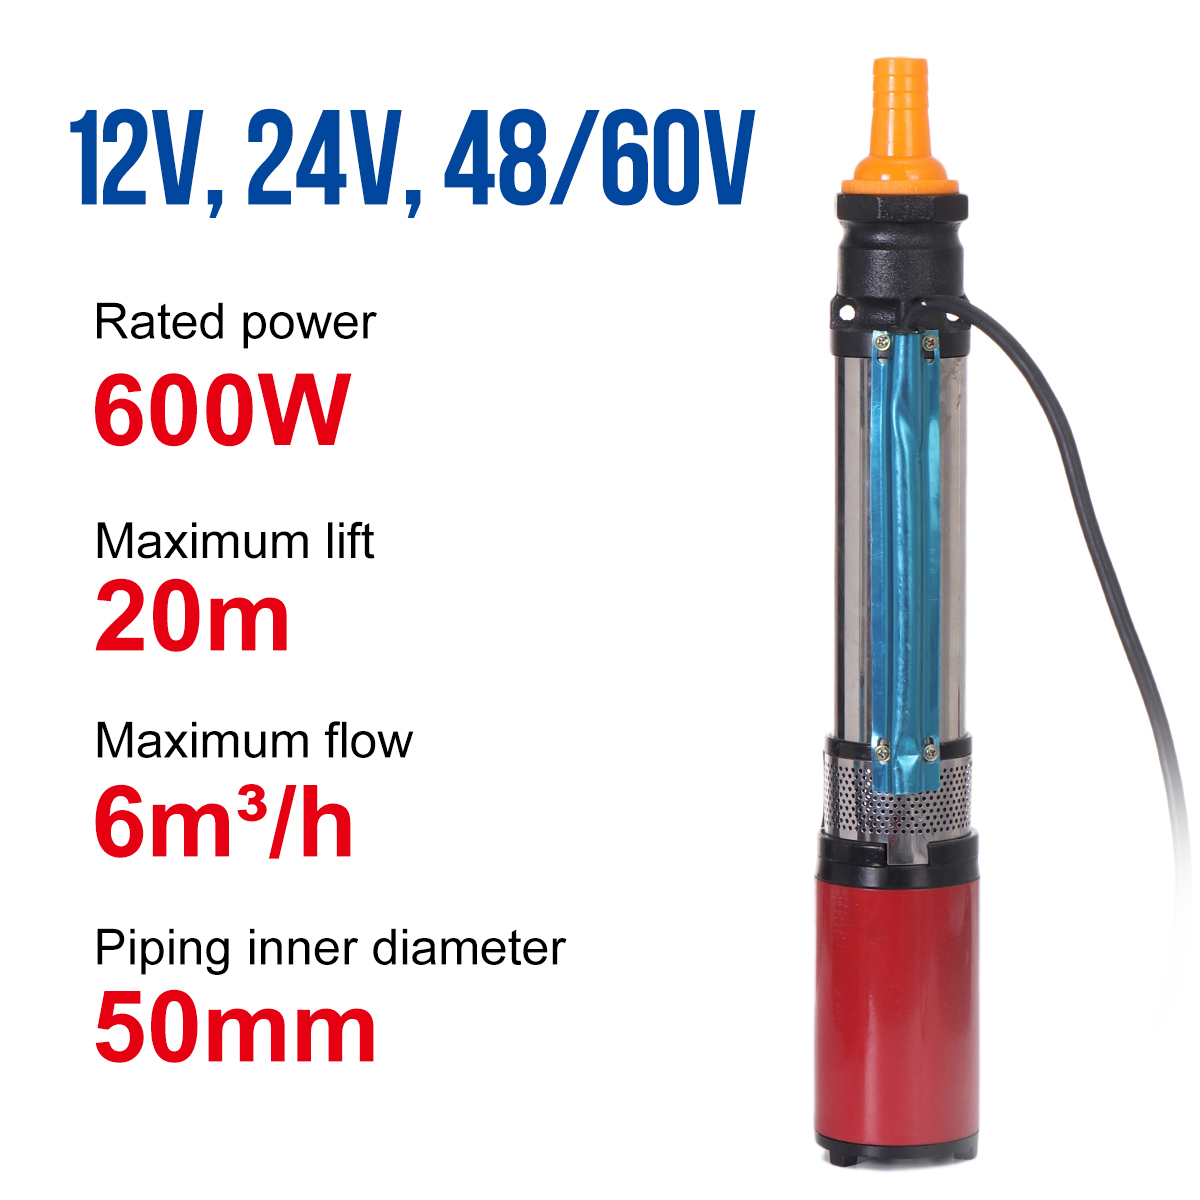 600W-1Inch-12V-24V-DC-Submersible-Deep-Well-Pump-6msup3h-Solar-Powered-Deep-Well-Water-Pump-1879339-3